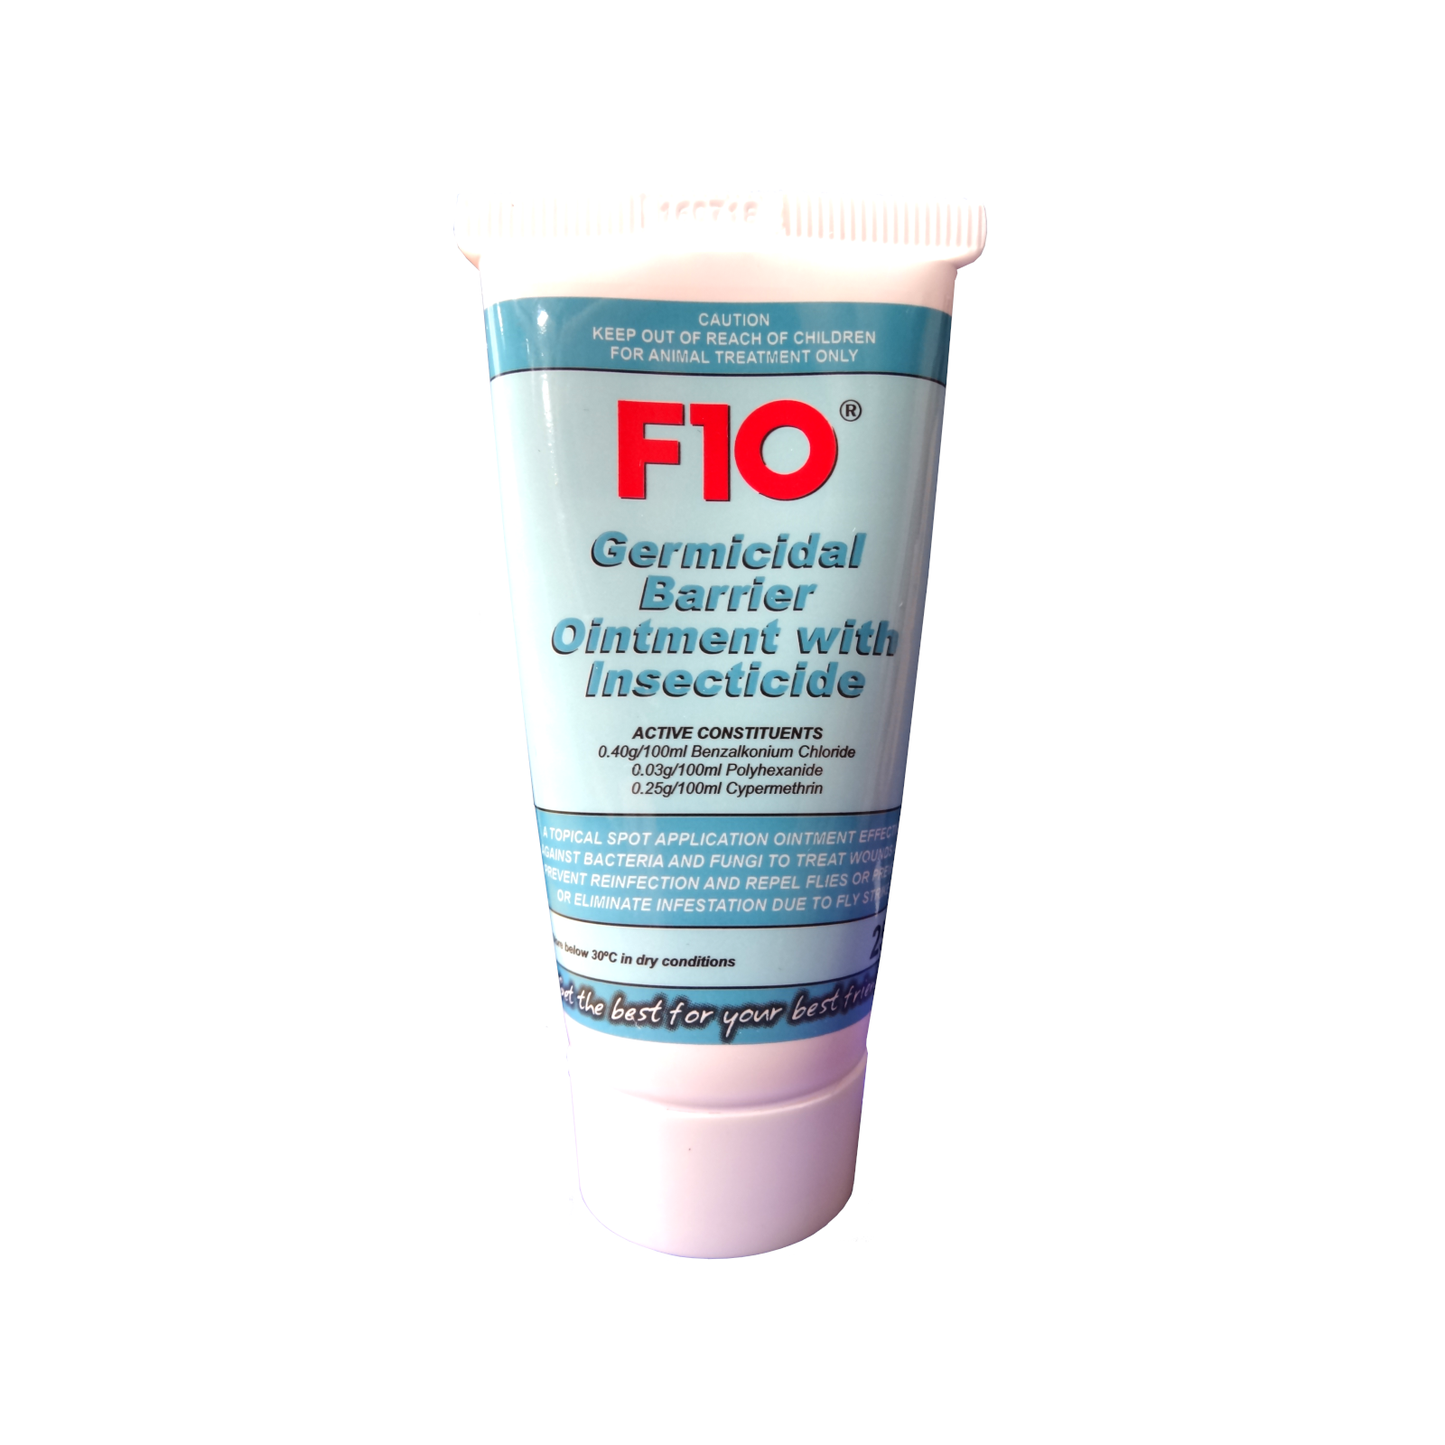 A 25g tube of F10 Germidical Barrier Ointment with Insecticide